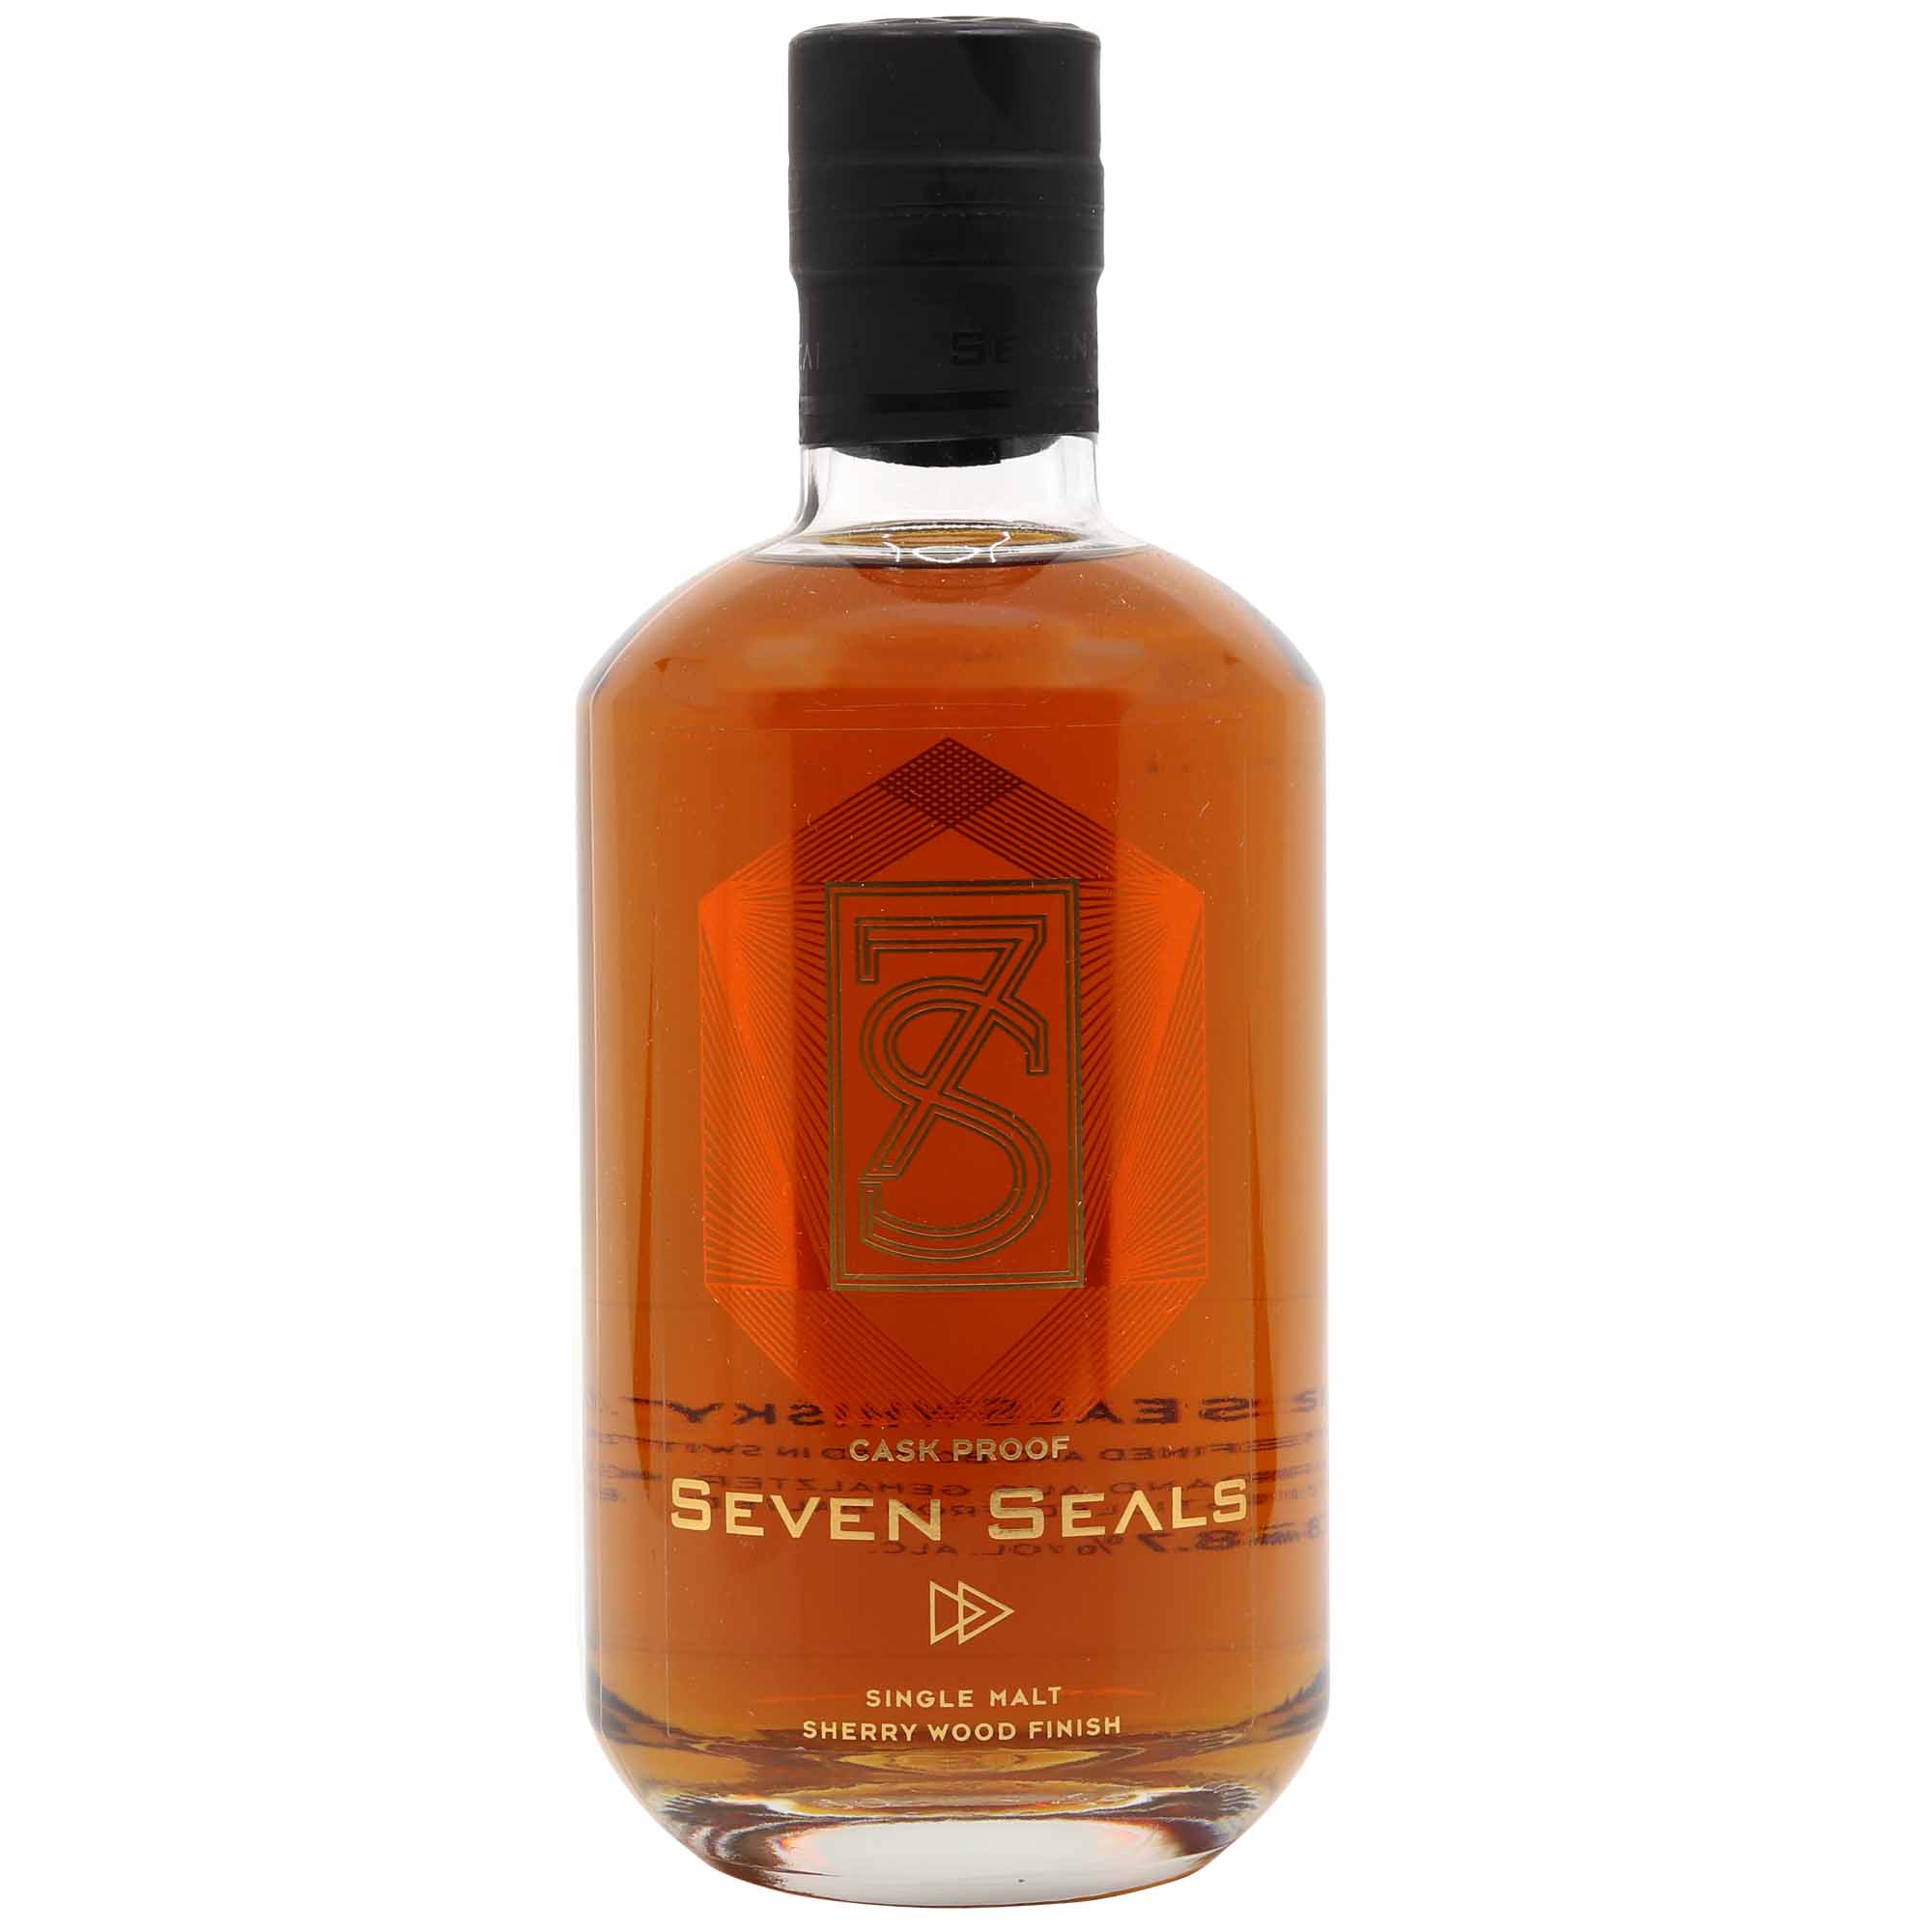 Seven Seals Sherry Wood Finish Cask Proof 50cl